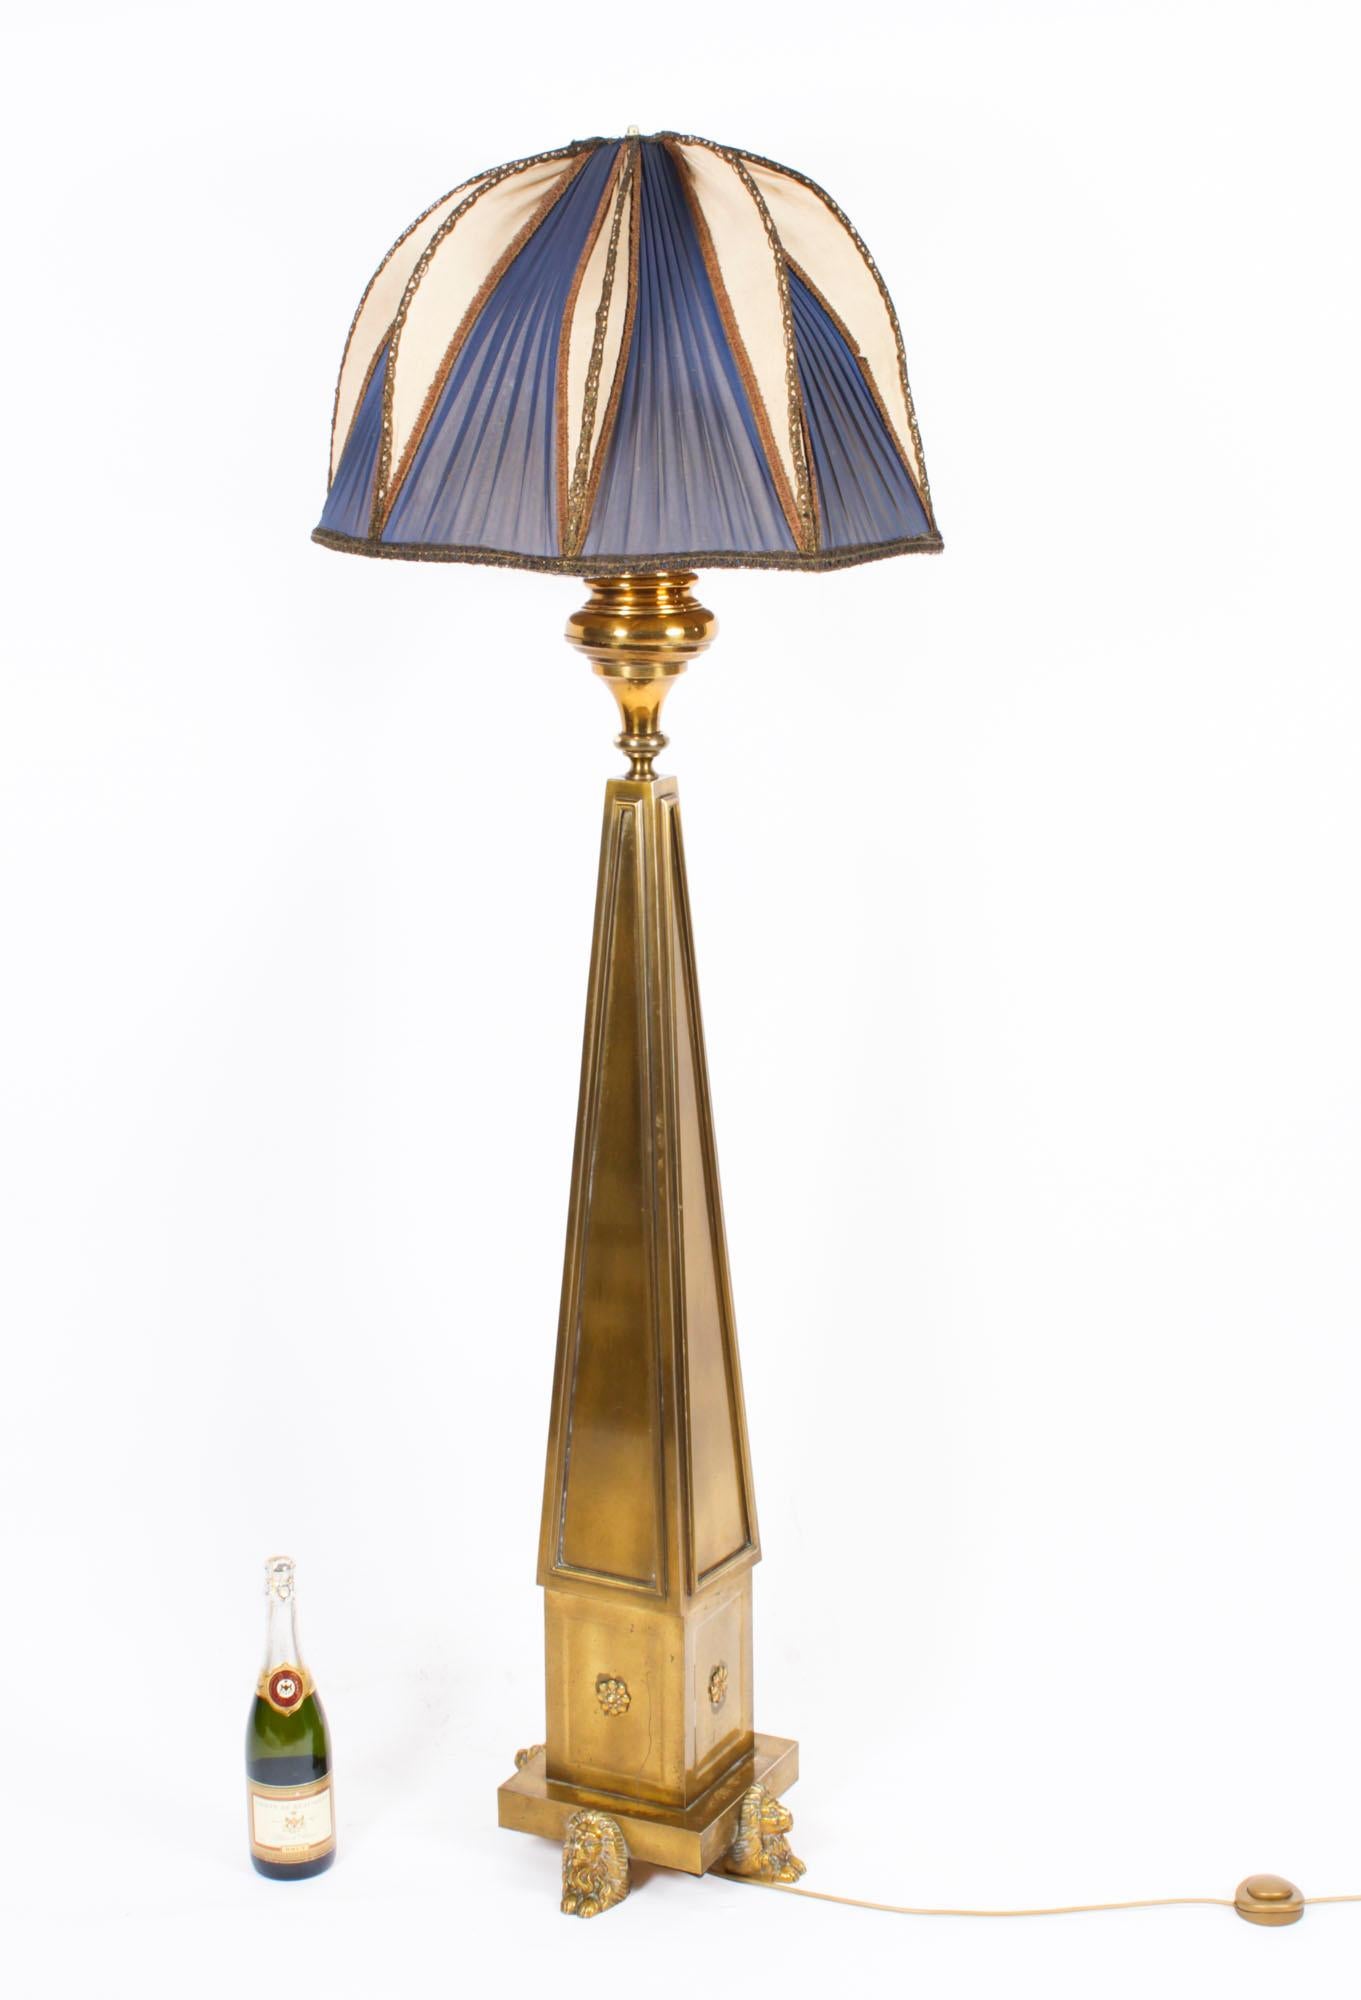 Antique French Art Deco Standard Lamp with Shade Circa 1920 For Sale 9